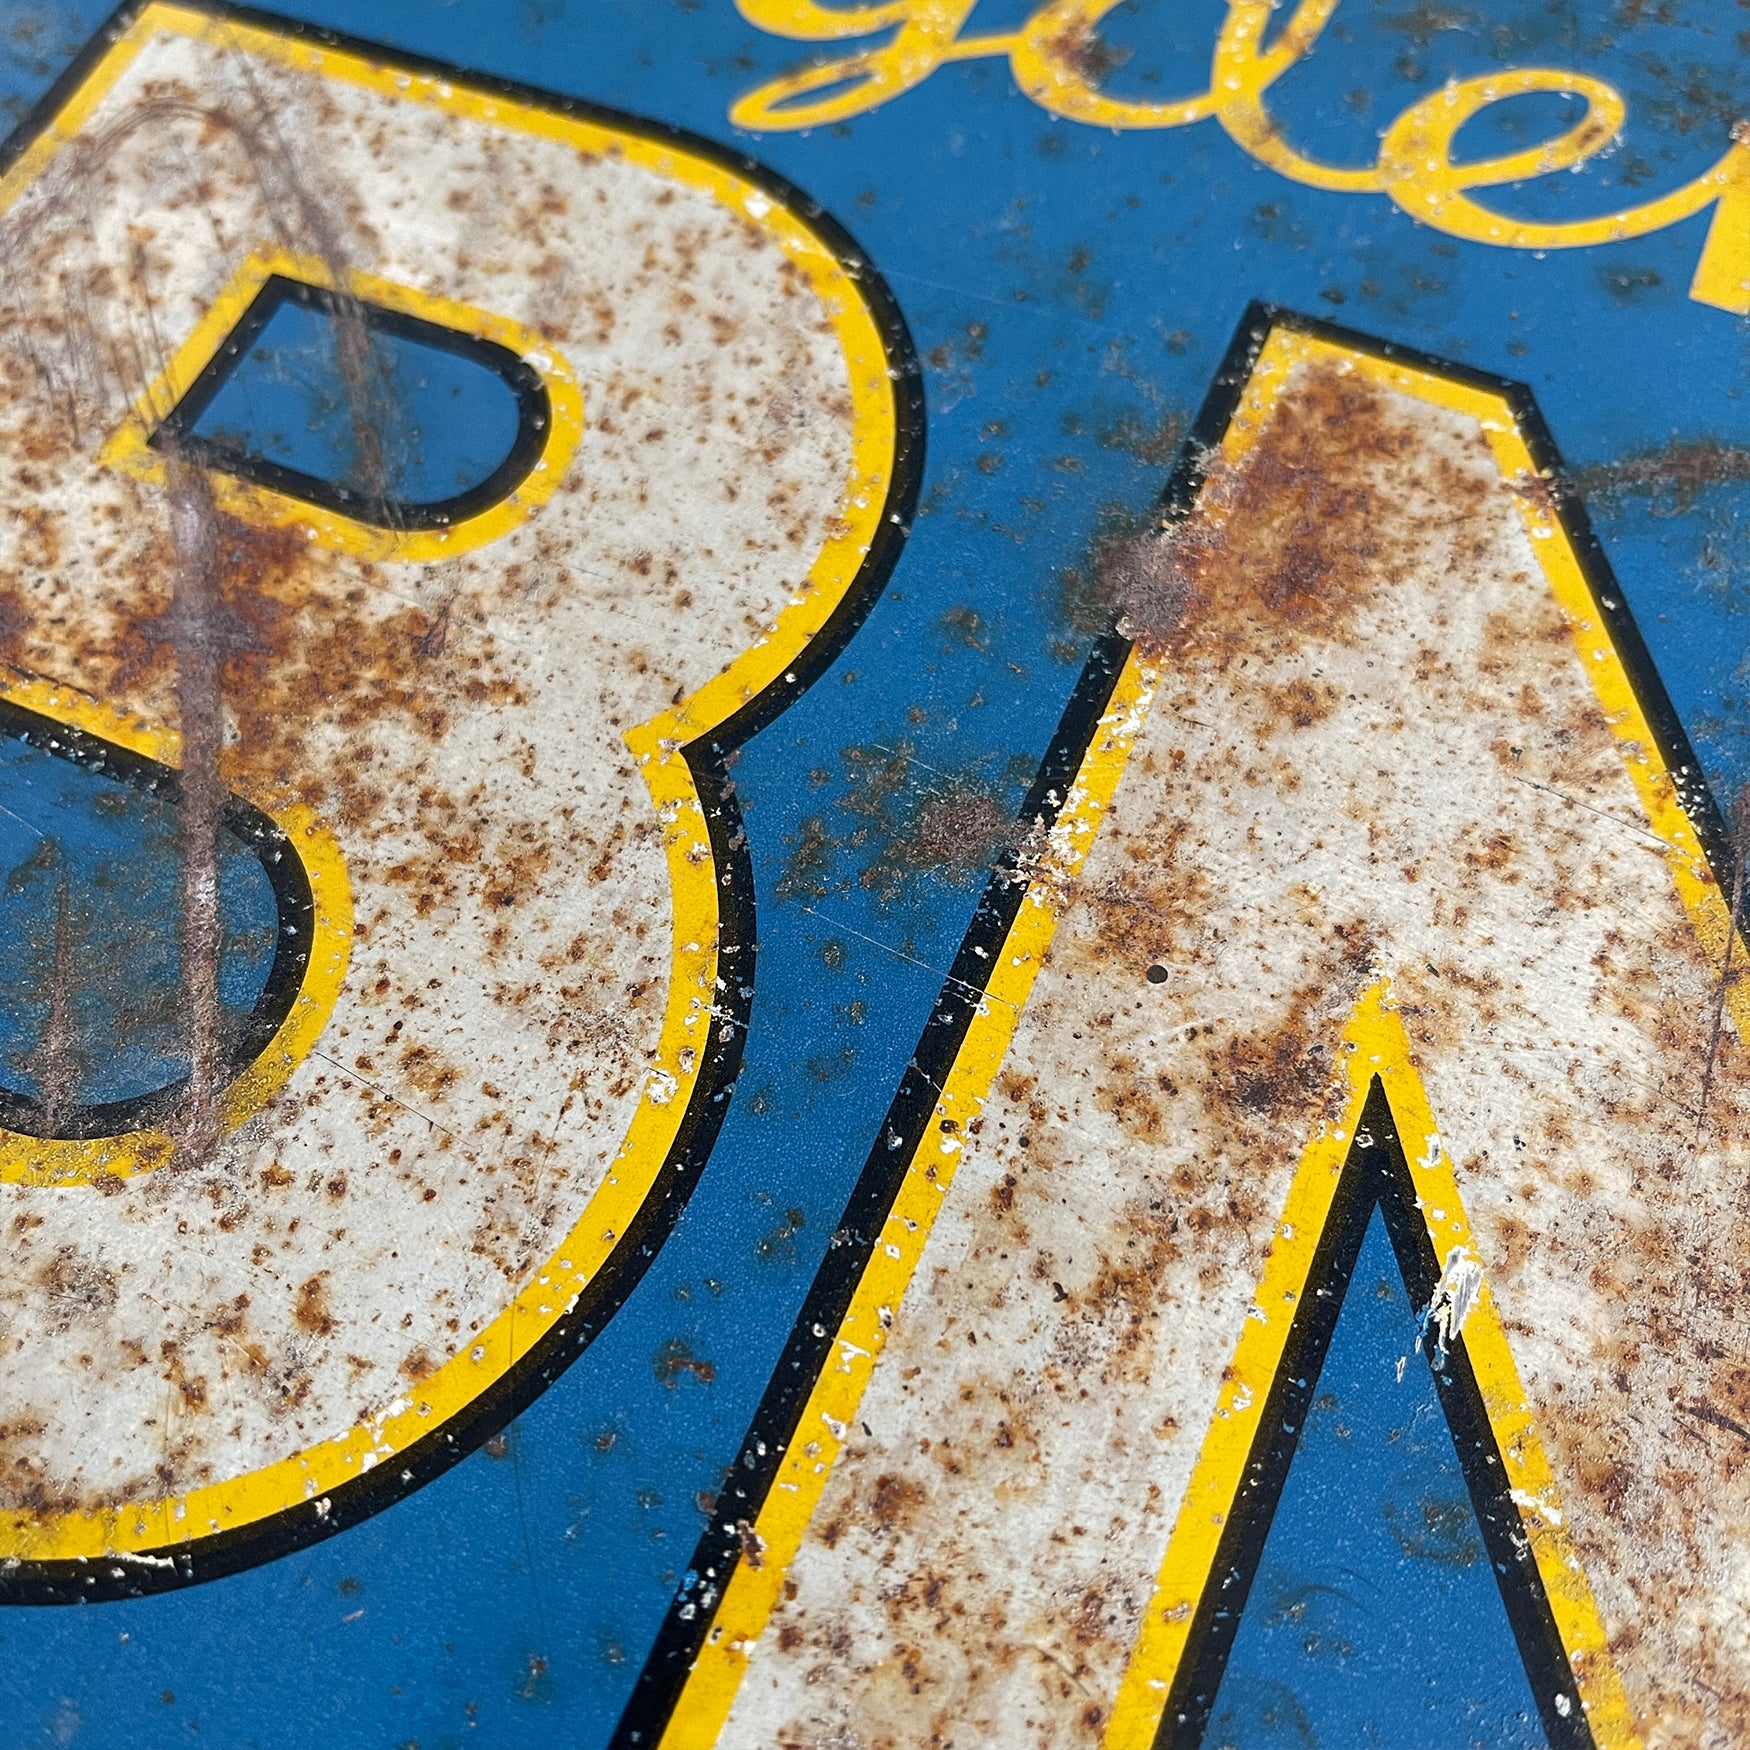 A 1930s Ogden's Cob Nut Sliced Tobacco Tin Sign. In a fantastic bright blue with yellow and black highlights around white type.warm yellow with dark blue type. - SHOP NOW - www.intovintage.co.uk